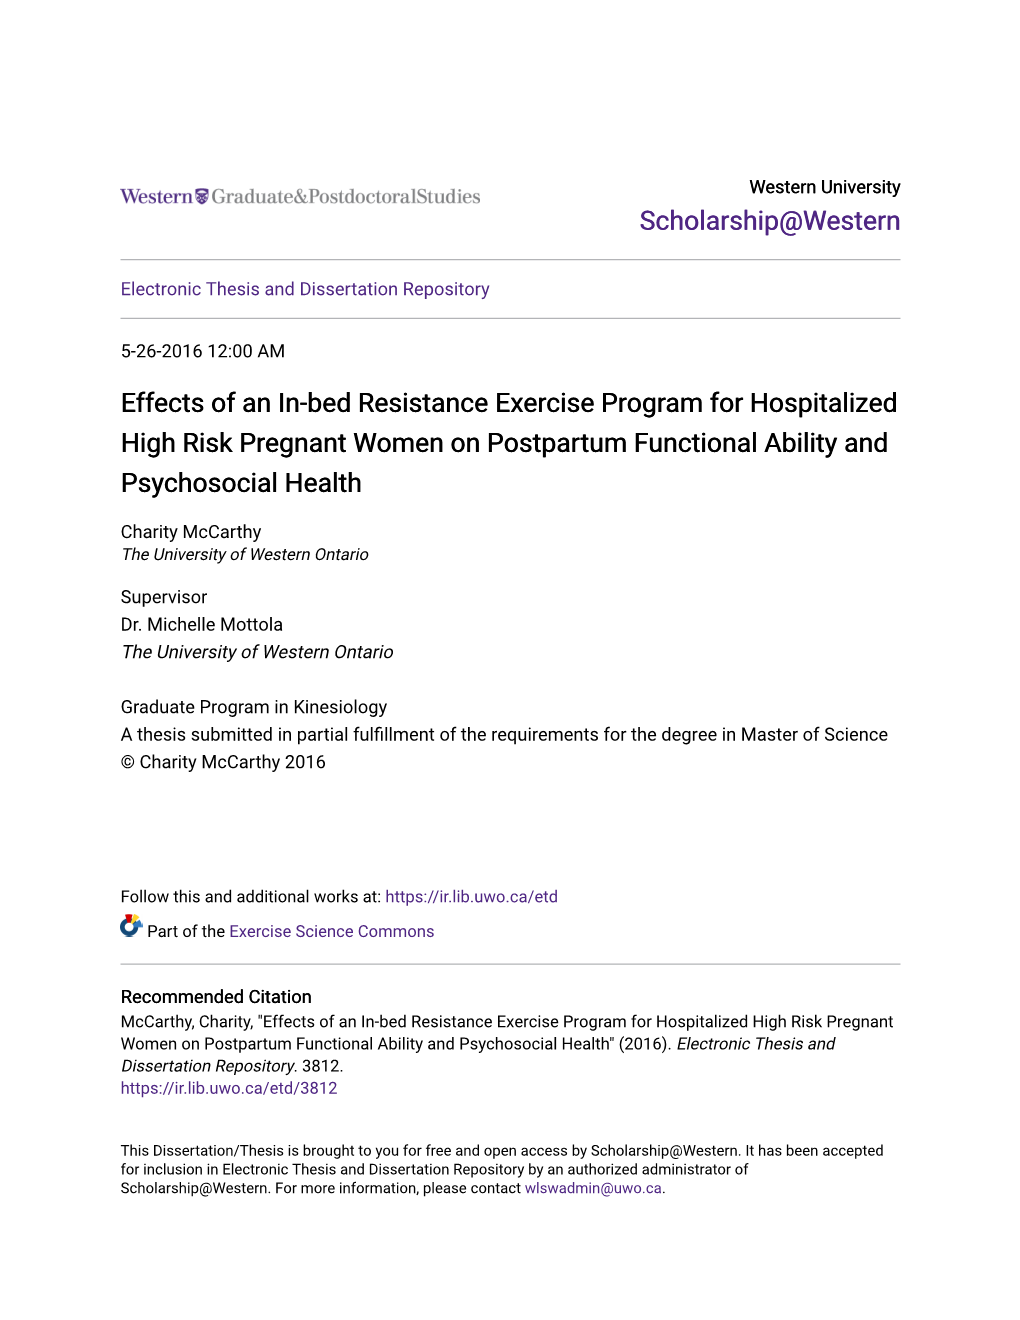 Effects of an In-Bed Resistance Exercise Program for Hospitalized High Risk Pregnant Women on Postpartum Functional Ability and Psychosocial Health